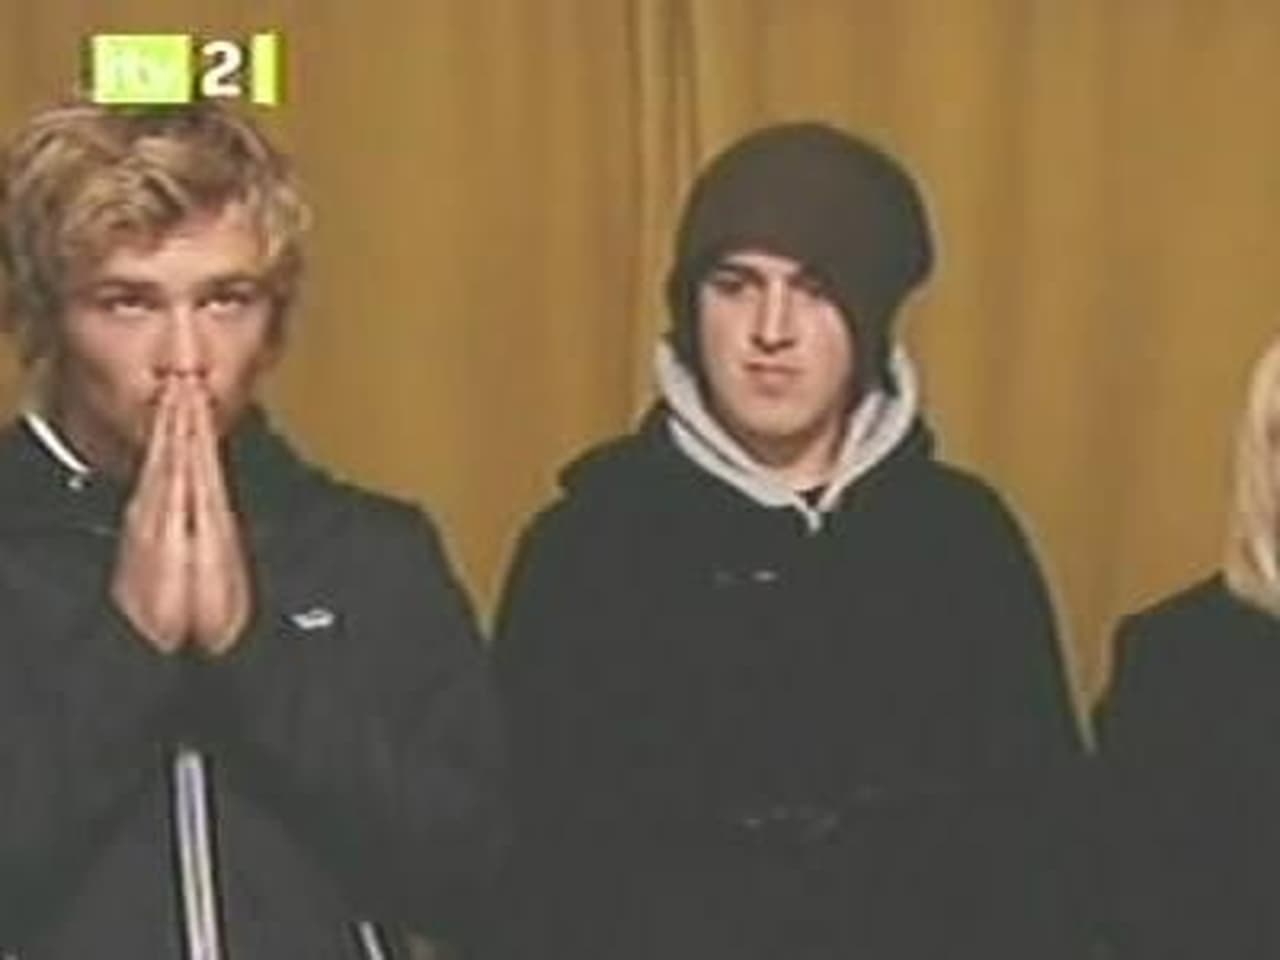 Ghosthunting with McFly